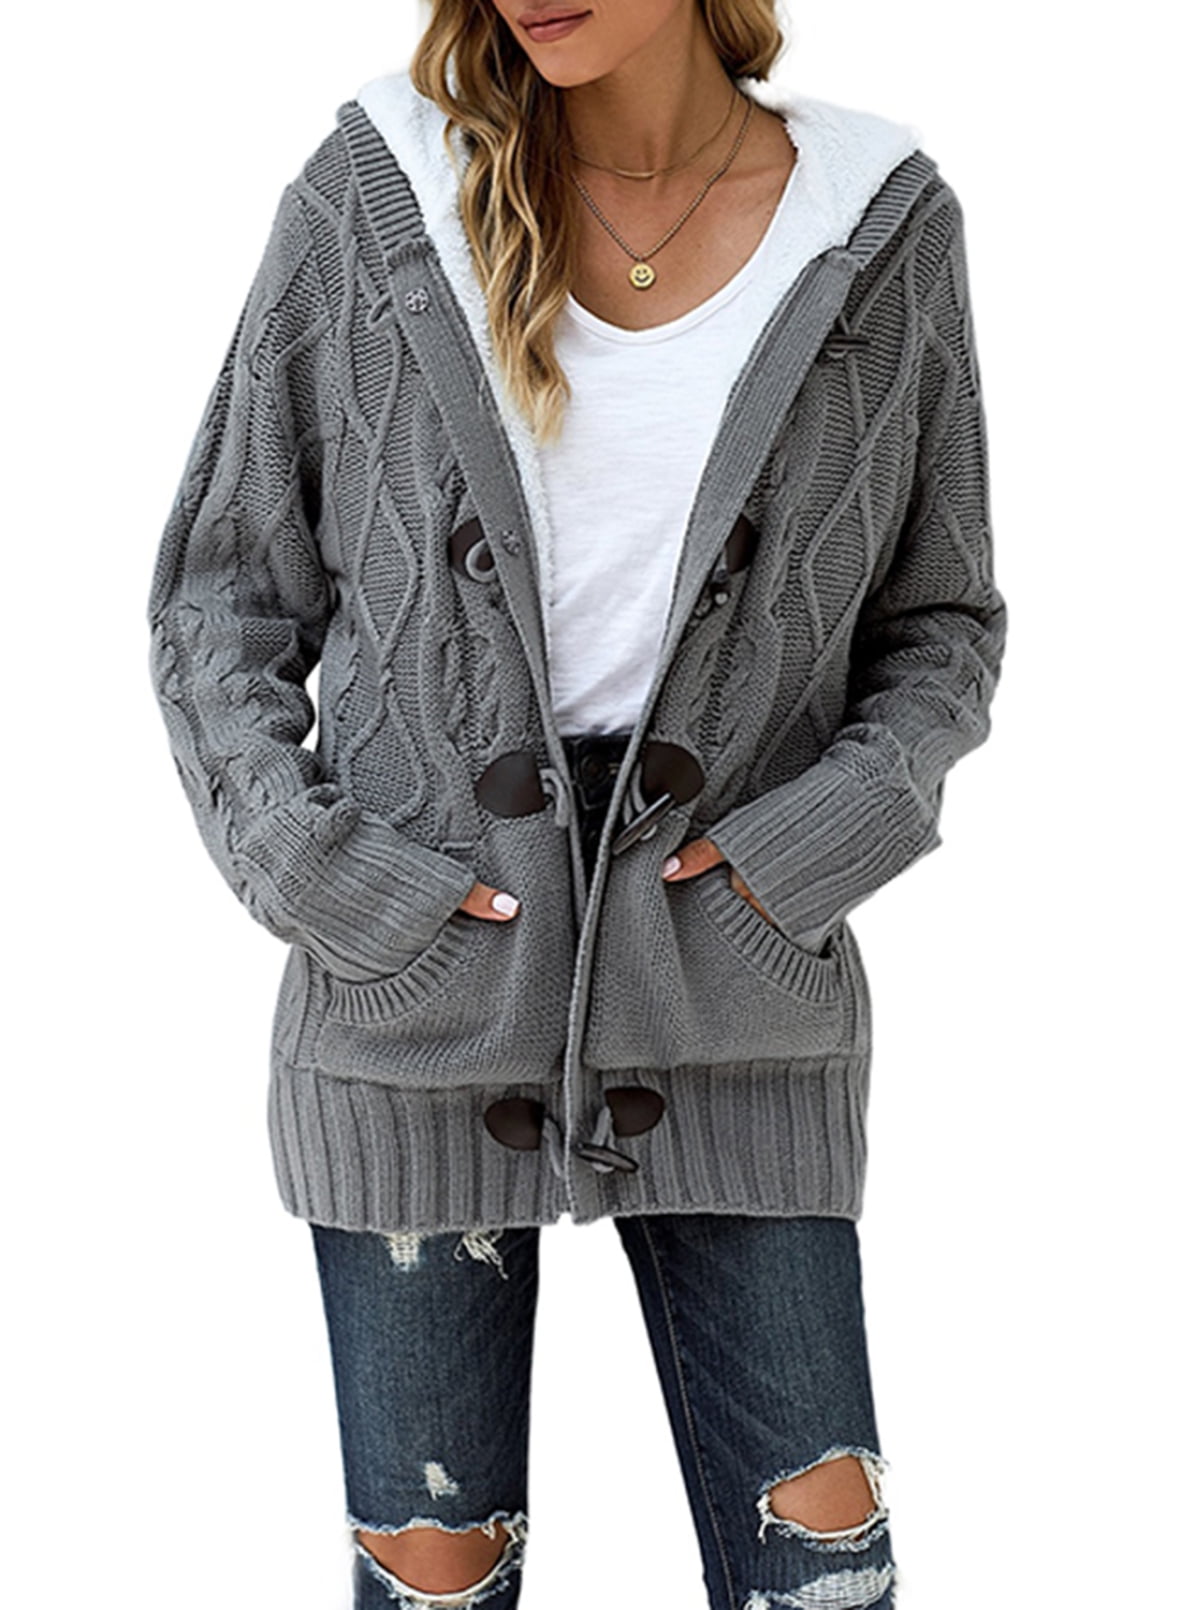 Womens Plus Size Hooded Cardigans Jackets Casual Long Sleeve Button Up Cable Knit Sweater Coat Outwear with Pockets